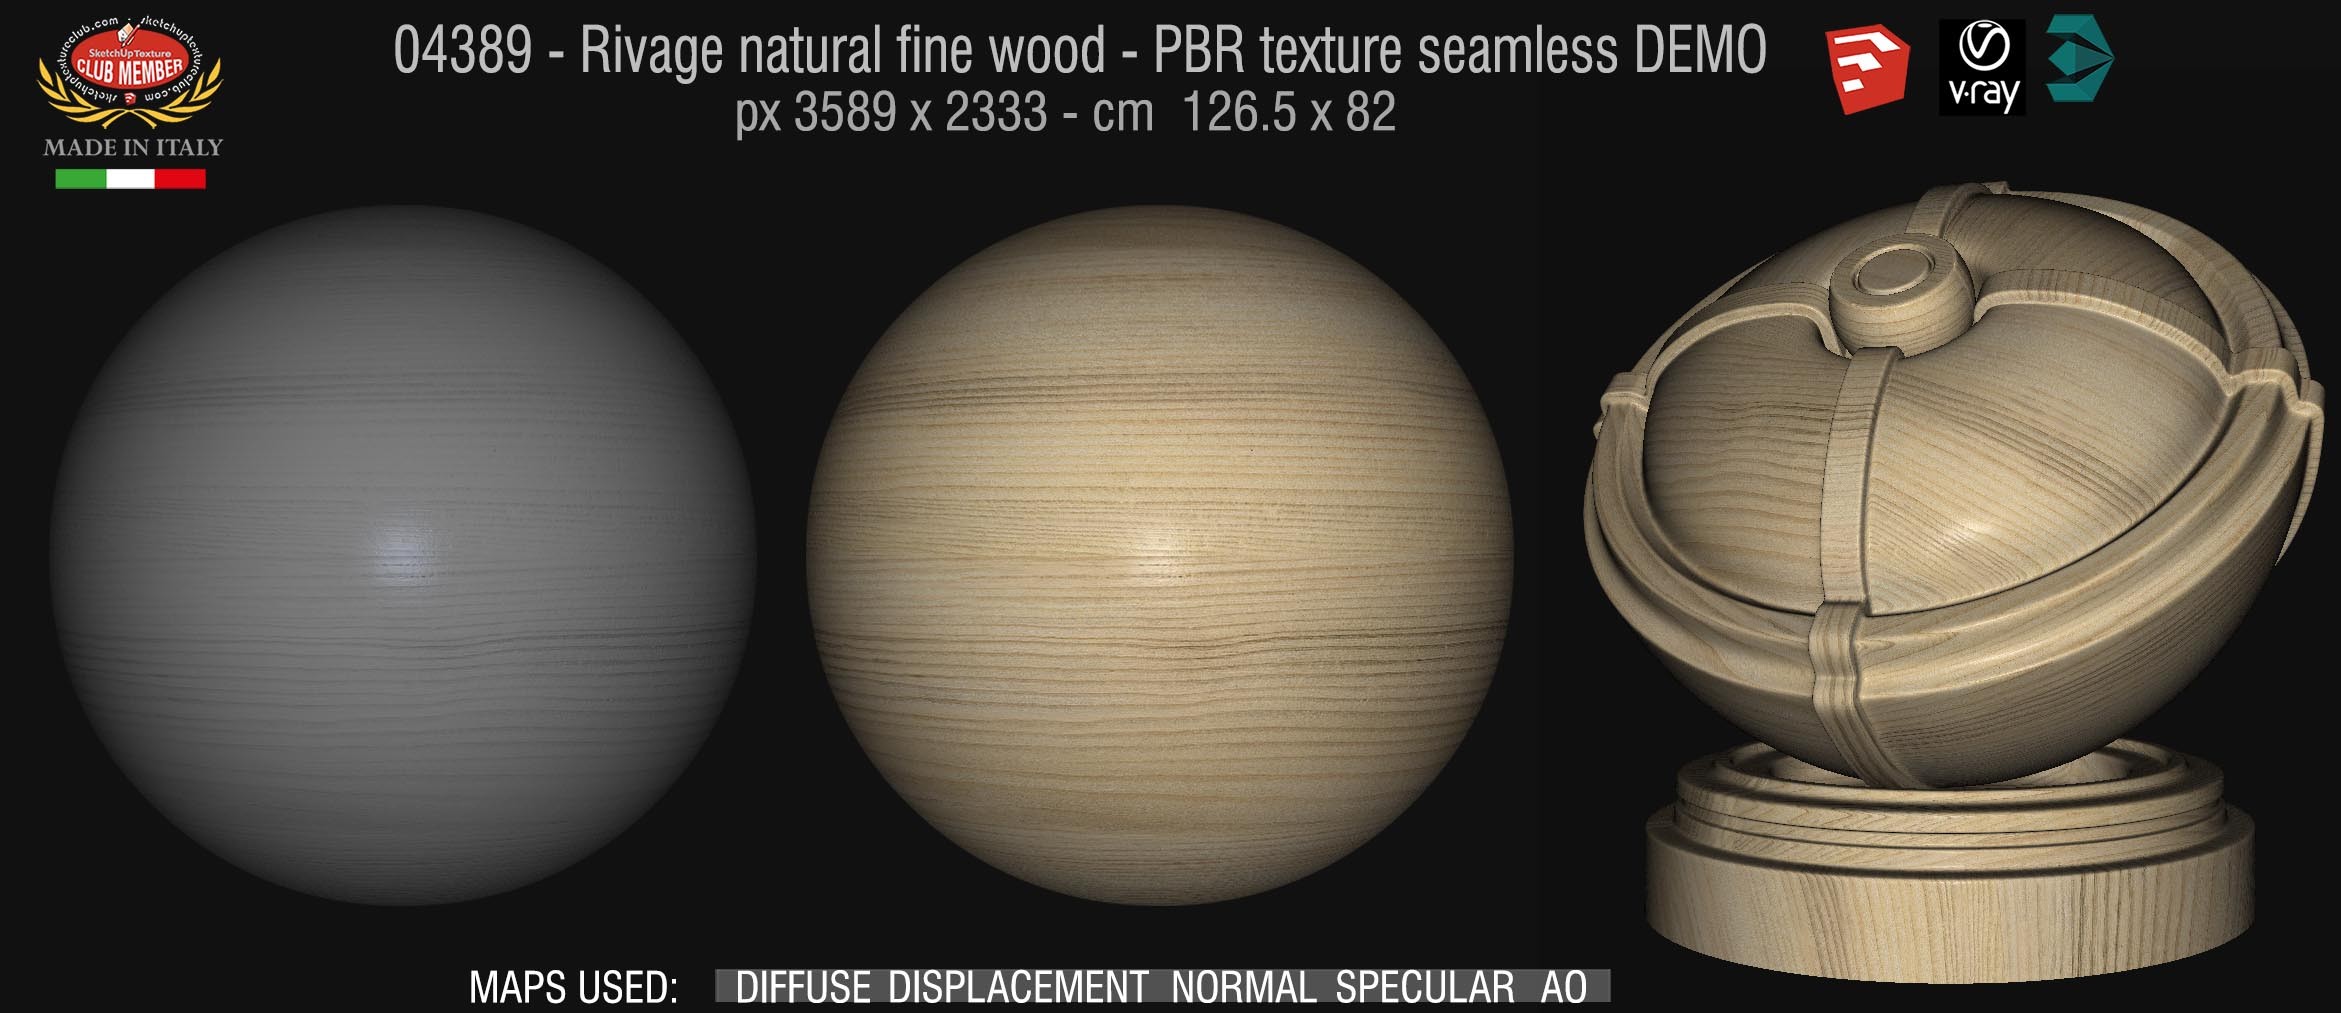 04389 Rivage natural fine wood - PBR texture seamless DEMO